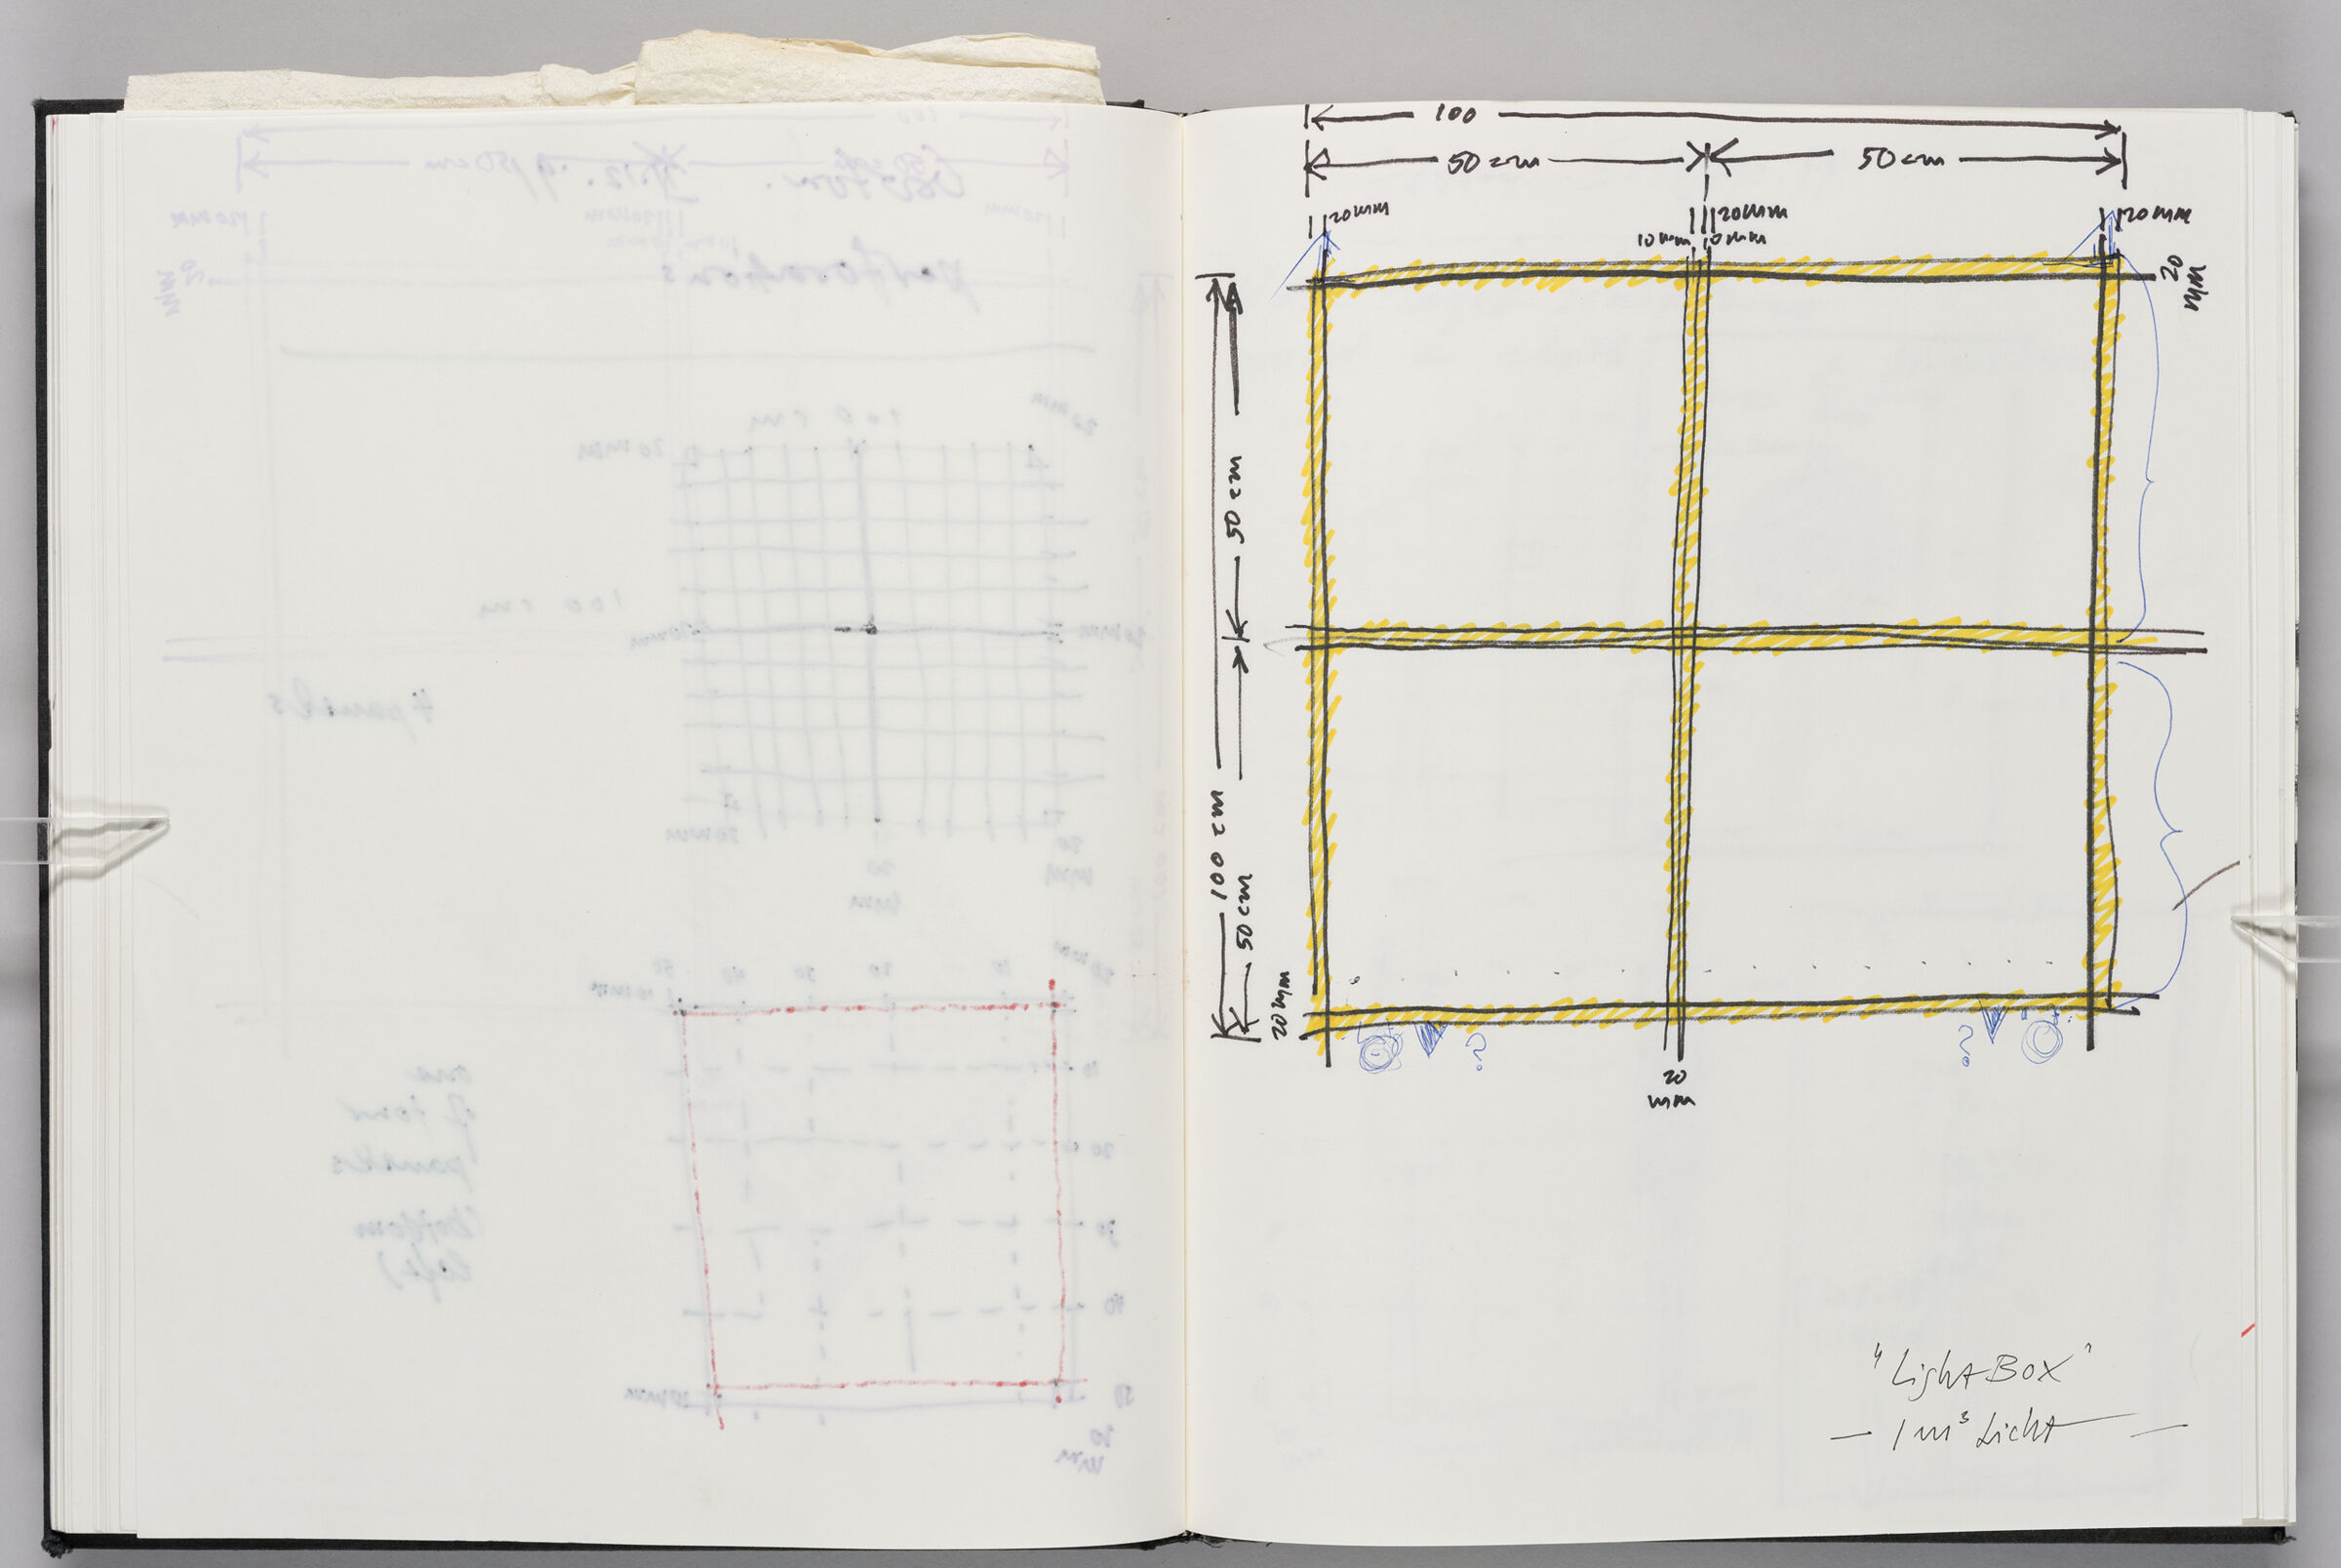 Untitled (Bleed-Through Of Previous Page And Color Transfer, Left Page); Untitled (Notes And Measurements For Light Sculpture, Right Page)